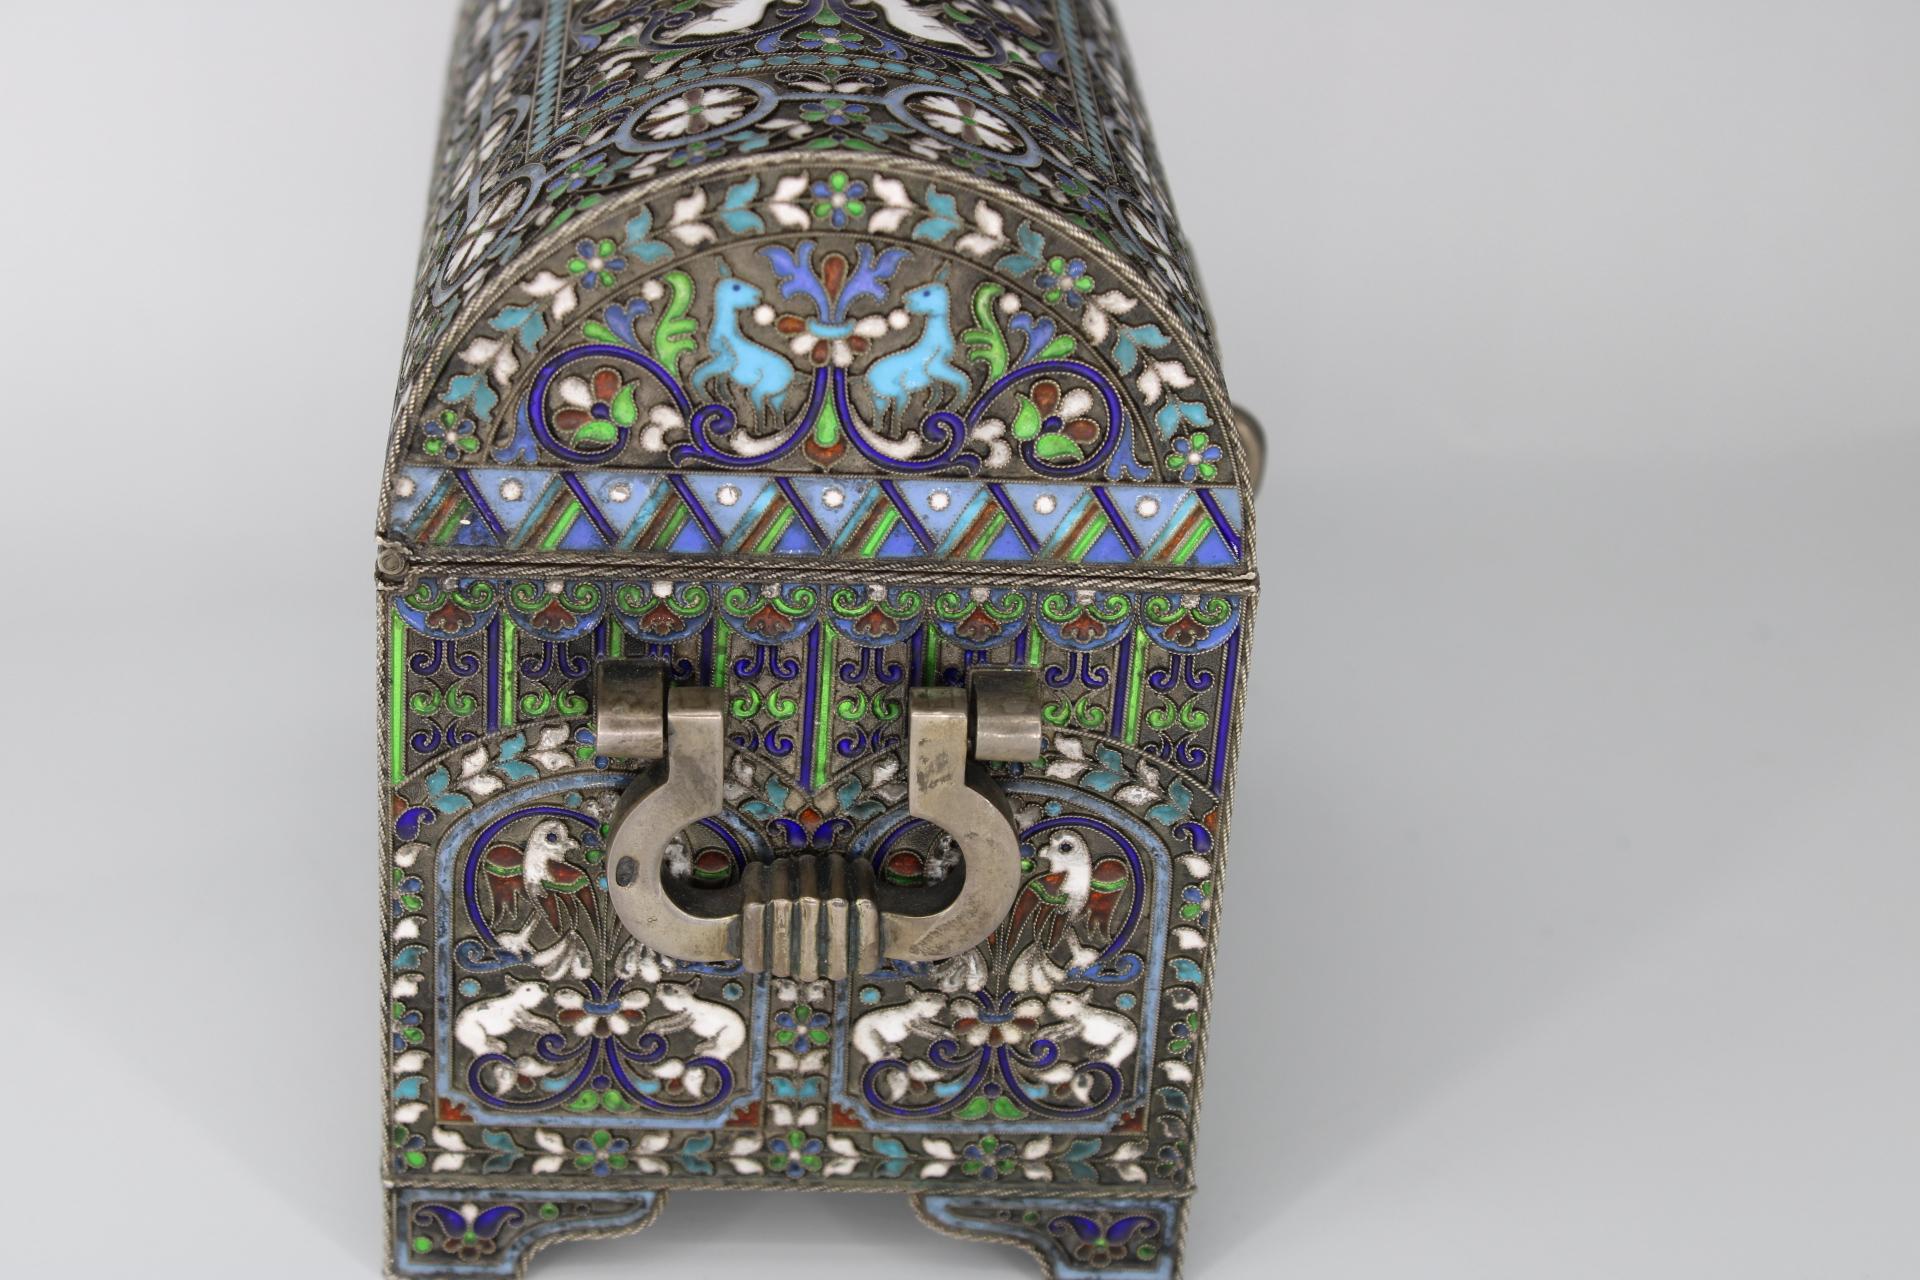 We are delighted to offer for sale this stunning and very rare full sized Imperial Russian 1881 Cloisonné enamel Chest box made from solid silver by the highly coveted Pavel Ovchinnikov whilst he worked with Ivan Khlebnikov complete with the Romanov